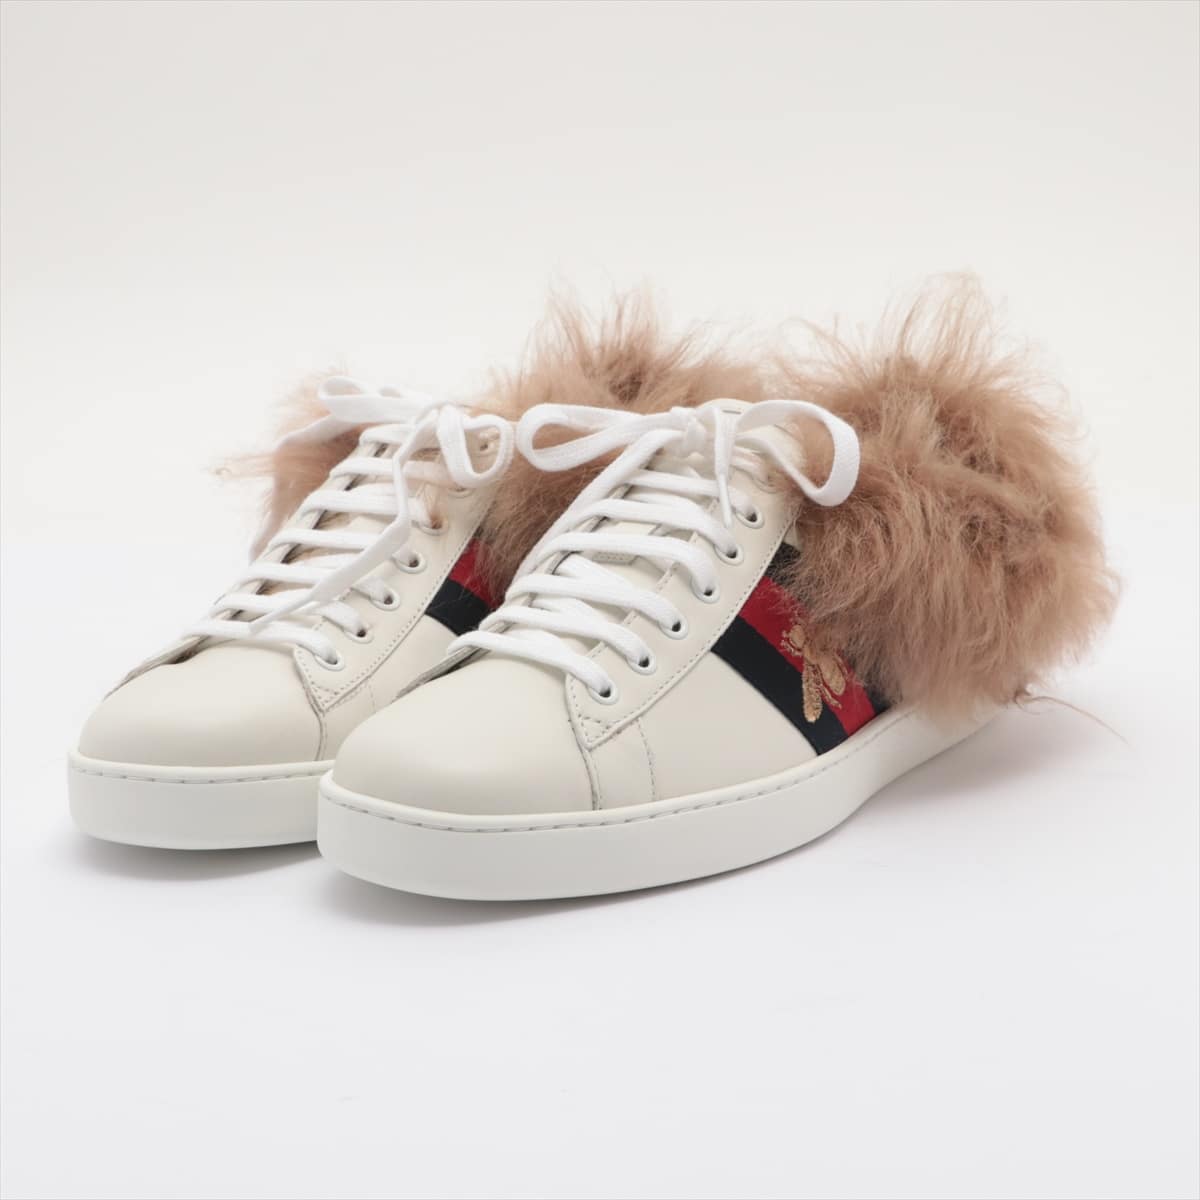 Gucci Sherry Line Fur × Leather Sneakers 8.5 Men's White ACE  bee-sting?